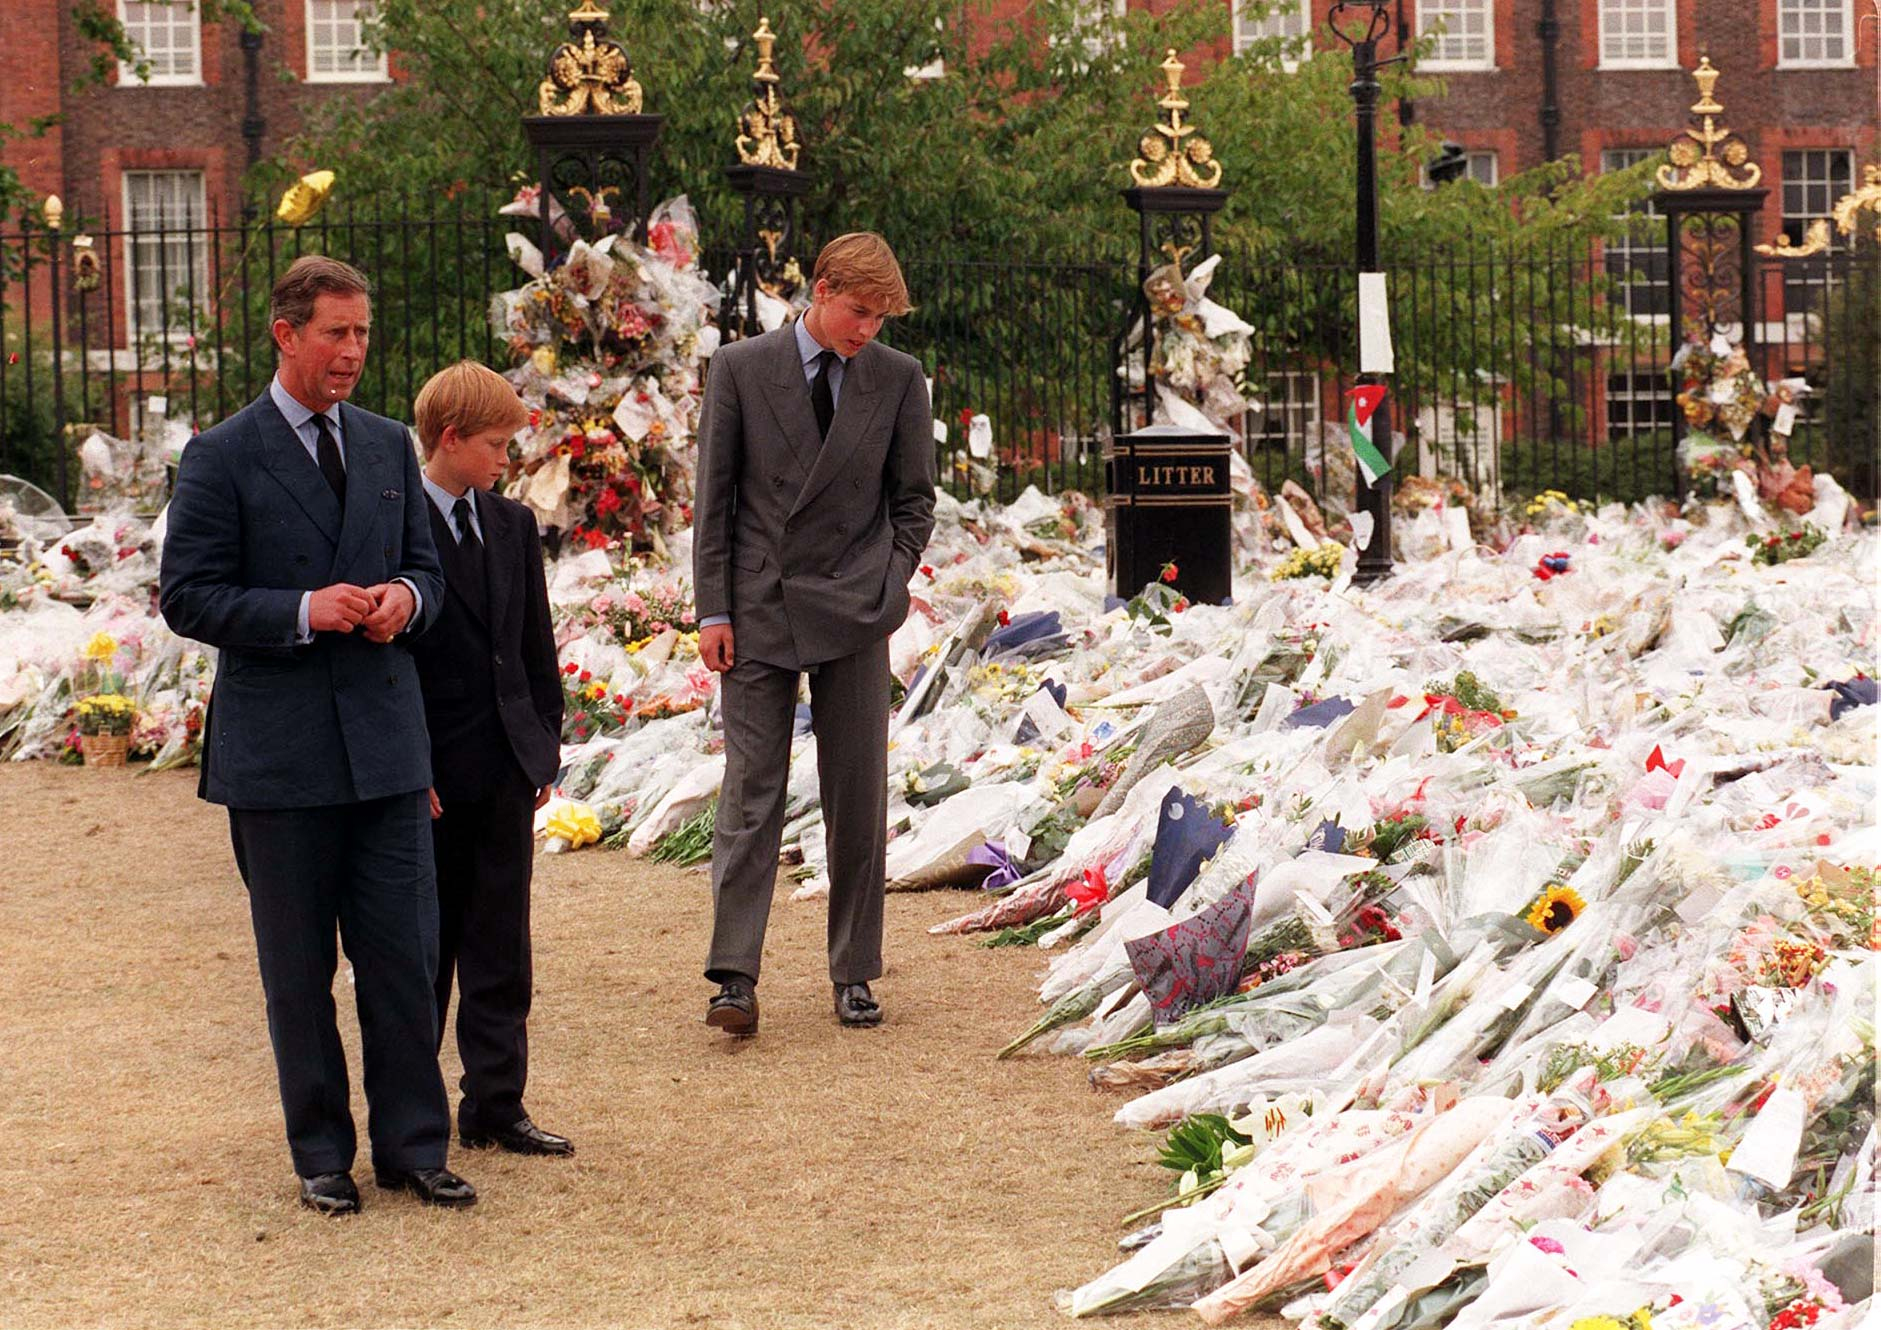 File photo dated 5/9/1997 of the Prince of Wales and his sons Prince William (right) and Prince Harry, view the sea of floral tributes to Diana, Princess of Wales, at Kensington Palace. The Princes on Wednesday viewed tributes attached to the Golden Gates of the Palace in London ahead of the 20th anniversary of their mother's death. Issue date: Friday September 5, 1997.